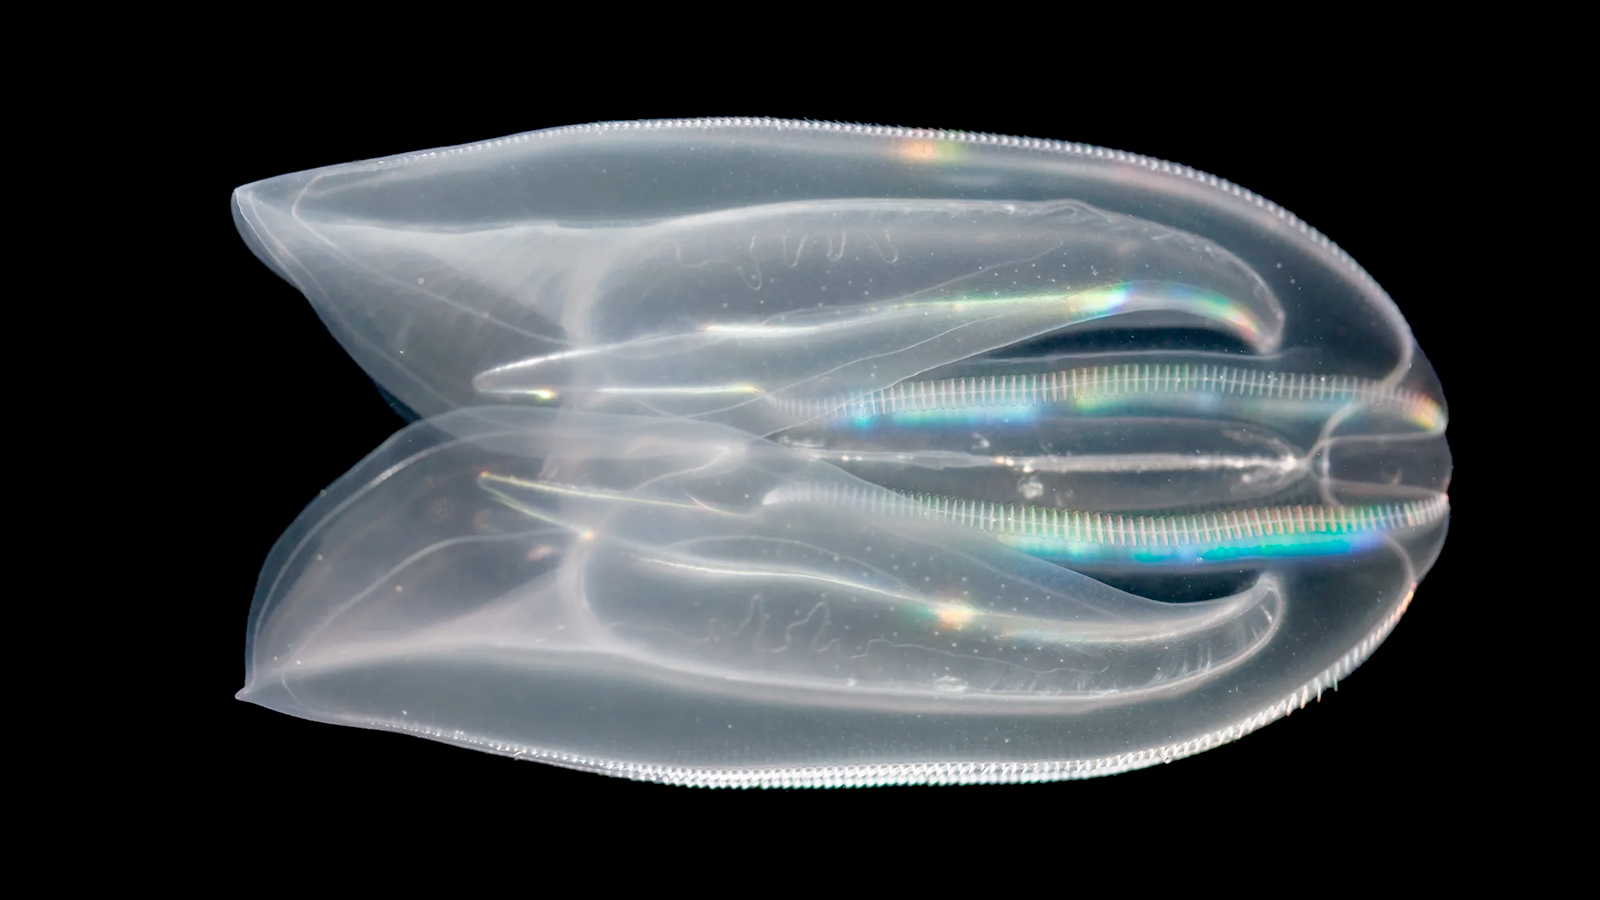 Comb jelly (Mnemiopsis), Credit: William D. Browne